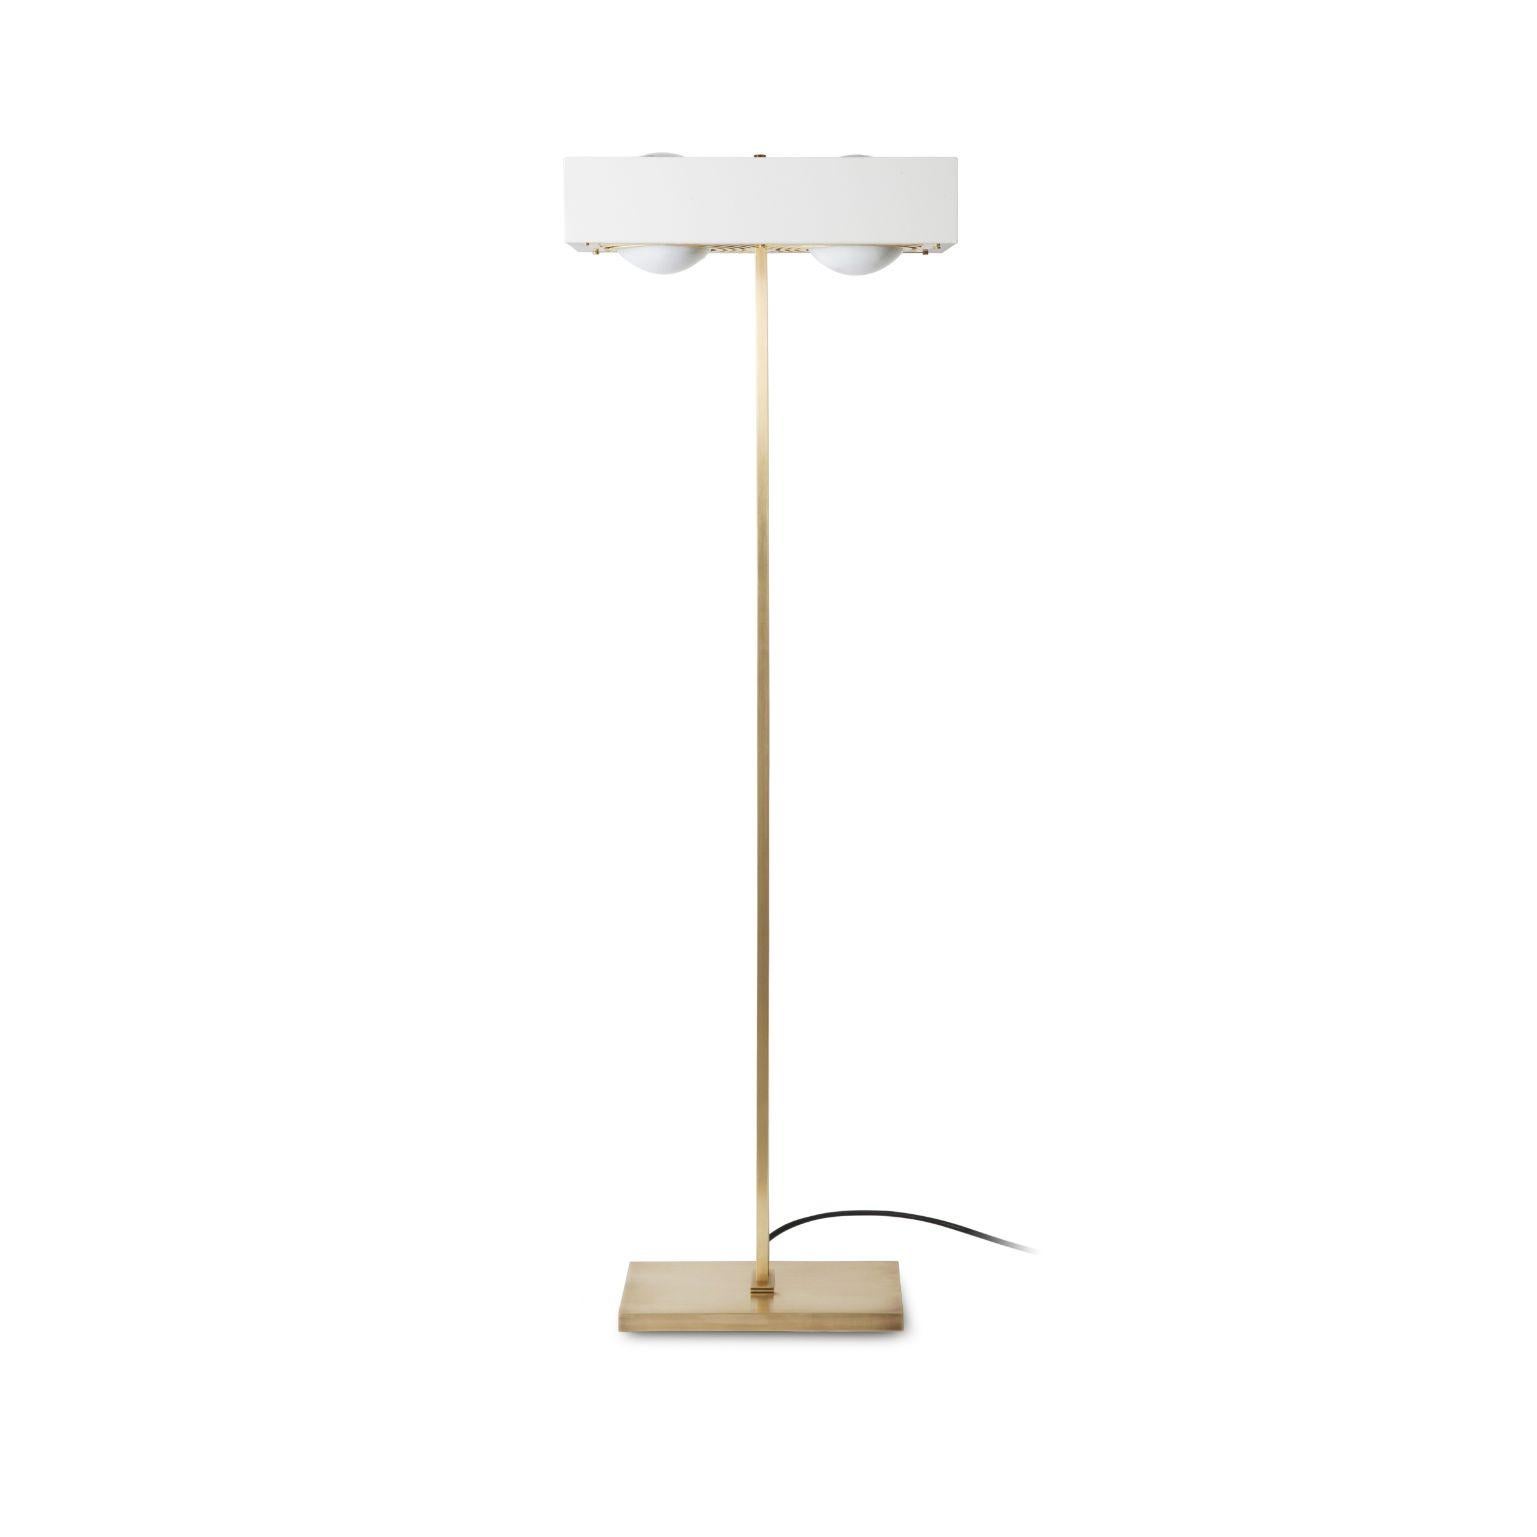 Kernel floor light - White by Bert Frank
Dimensions: 125 x 40 x 30 cm
Materials: Brass, steel

Brushed brass lacquered as standard, custom finishes available.

When Adam Yeats and Robbie Llewellyn founded Bert Frank in 2013 it was a meeting of minds